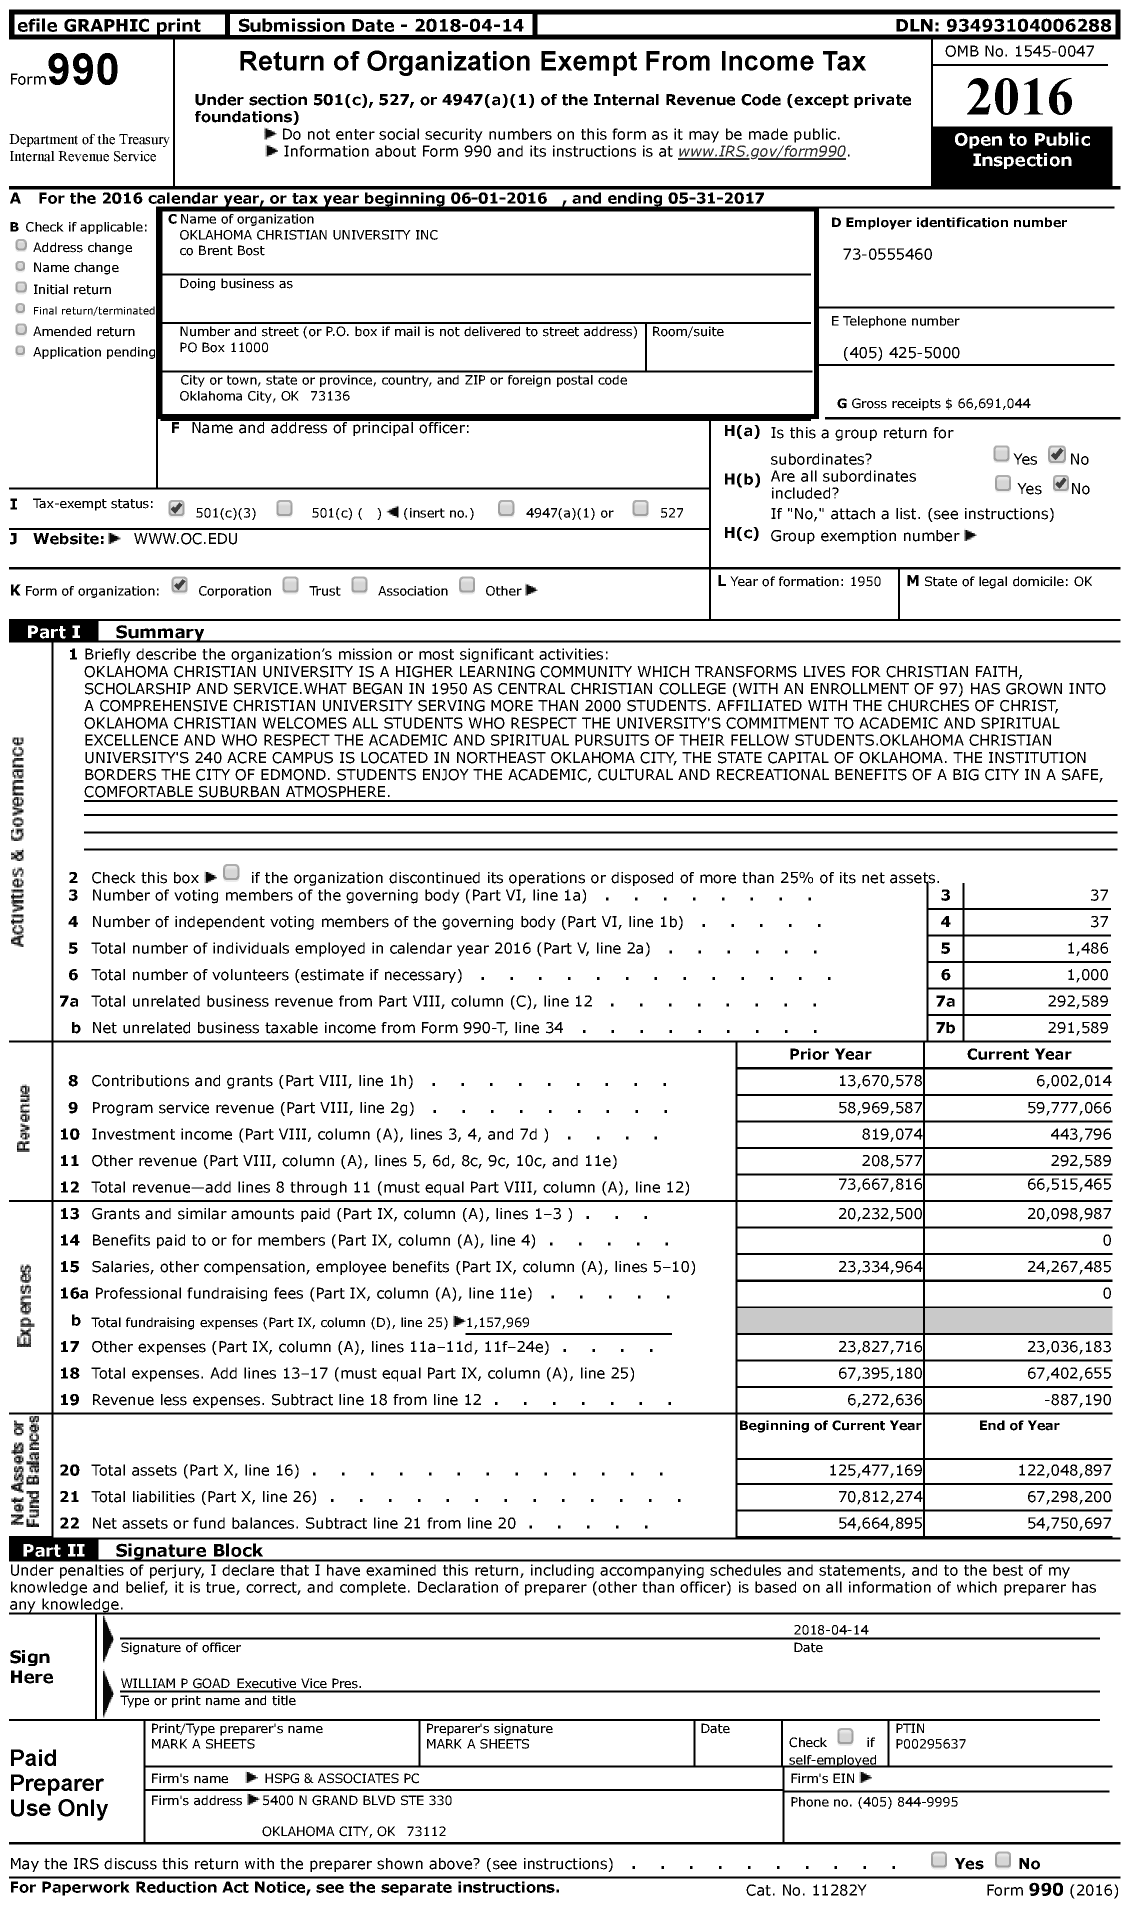 Image of first page of 2016 Form 990 for Joseph and Harvey Meyerhoff Family Charitable Funds